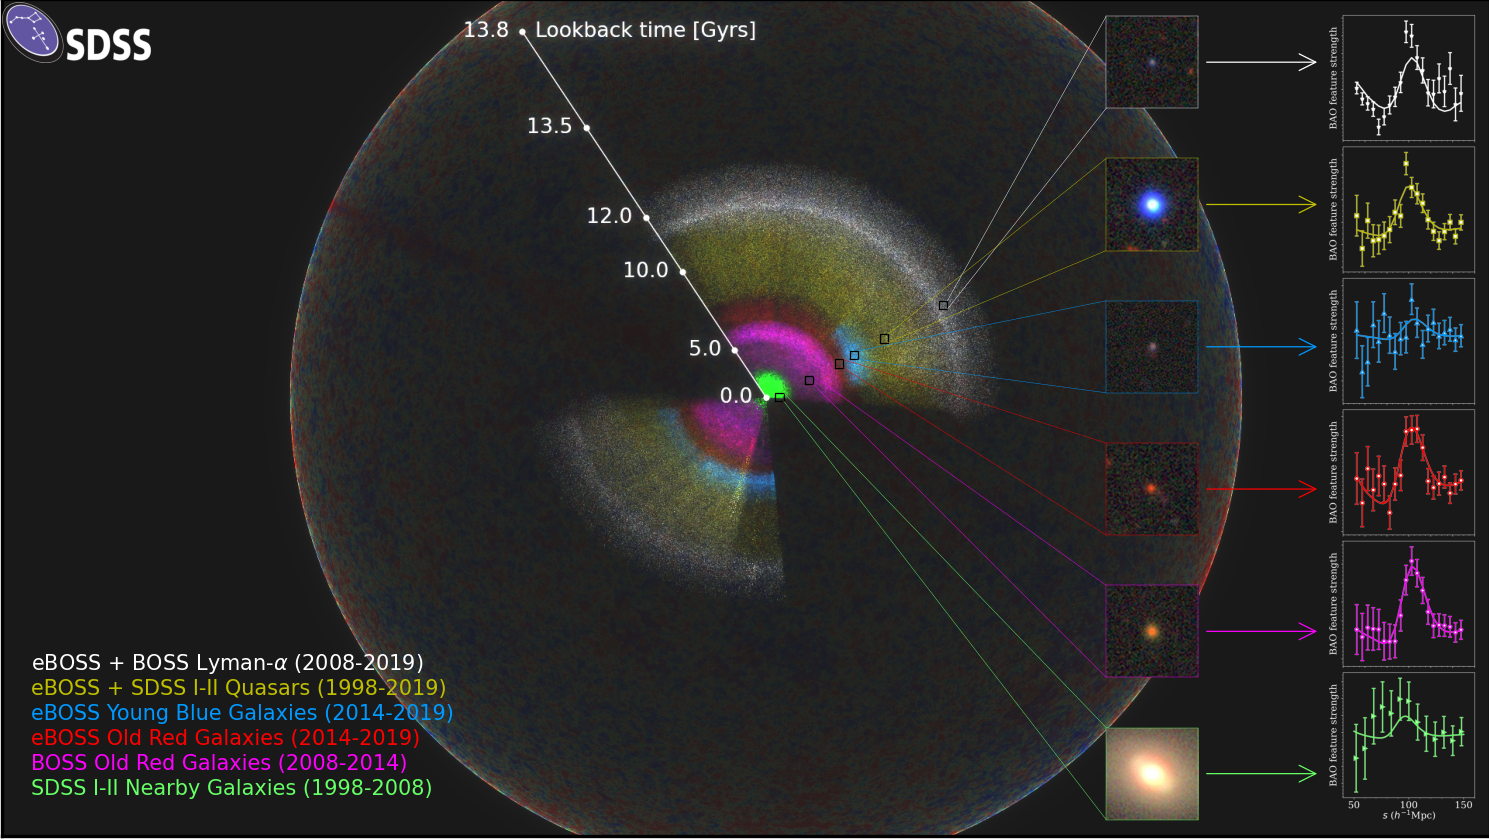 The map of the Universe revealed by the SDSS